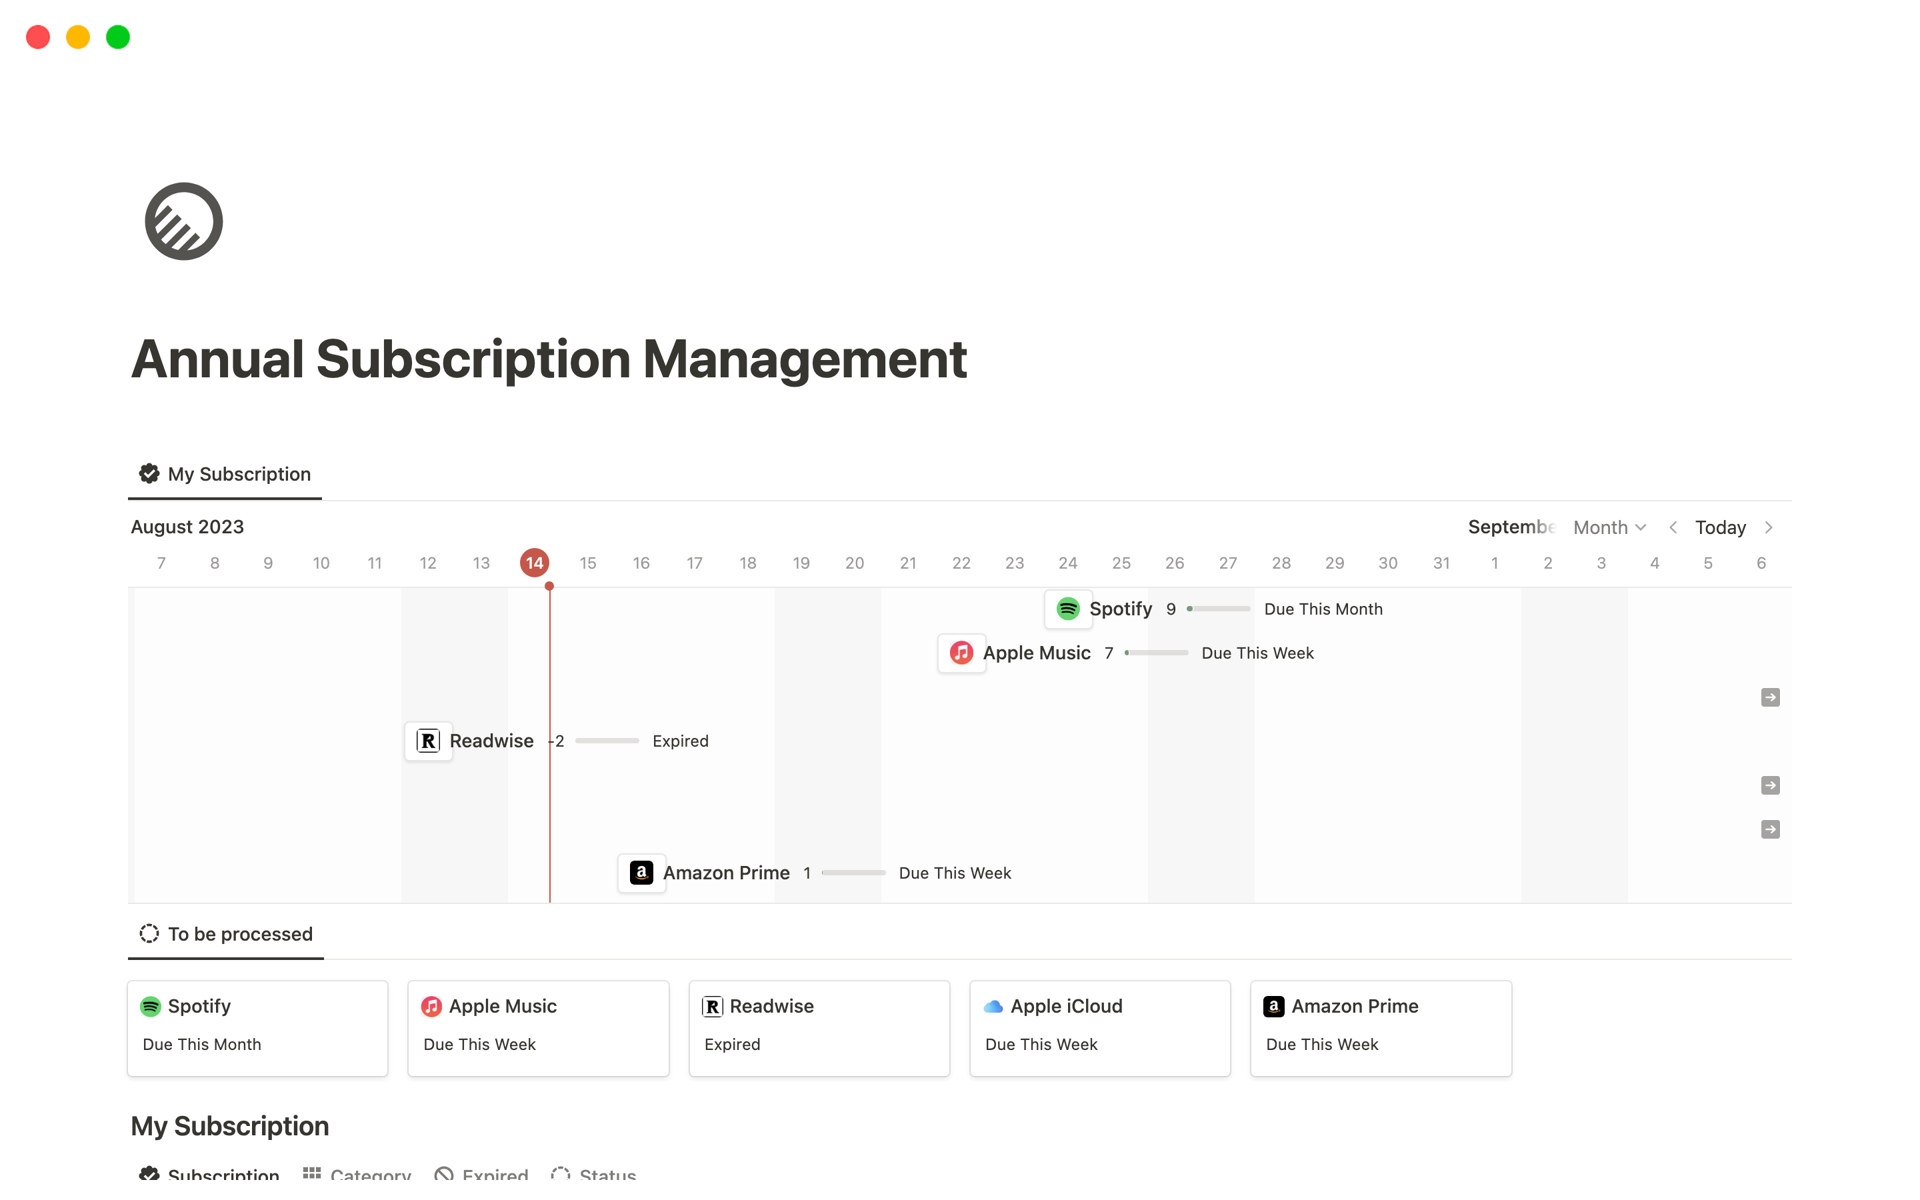 The Annual Subscription list is a free Notion template that helps users manage various subscription services in their daily work life, such as cost recording, reminder, management and so on.